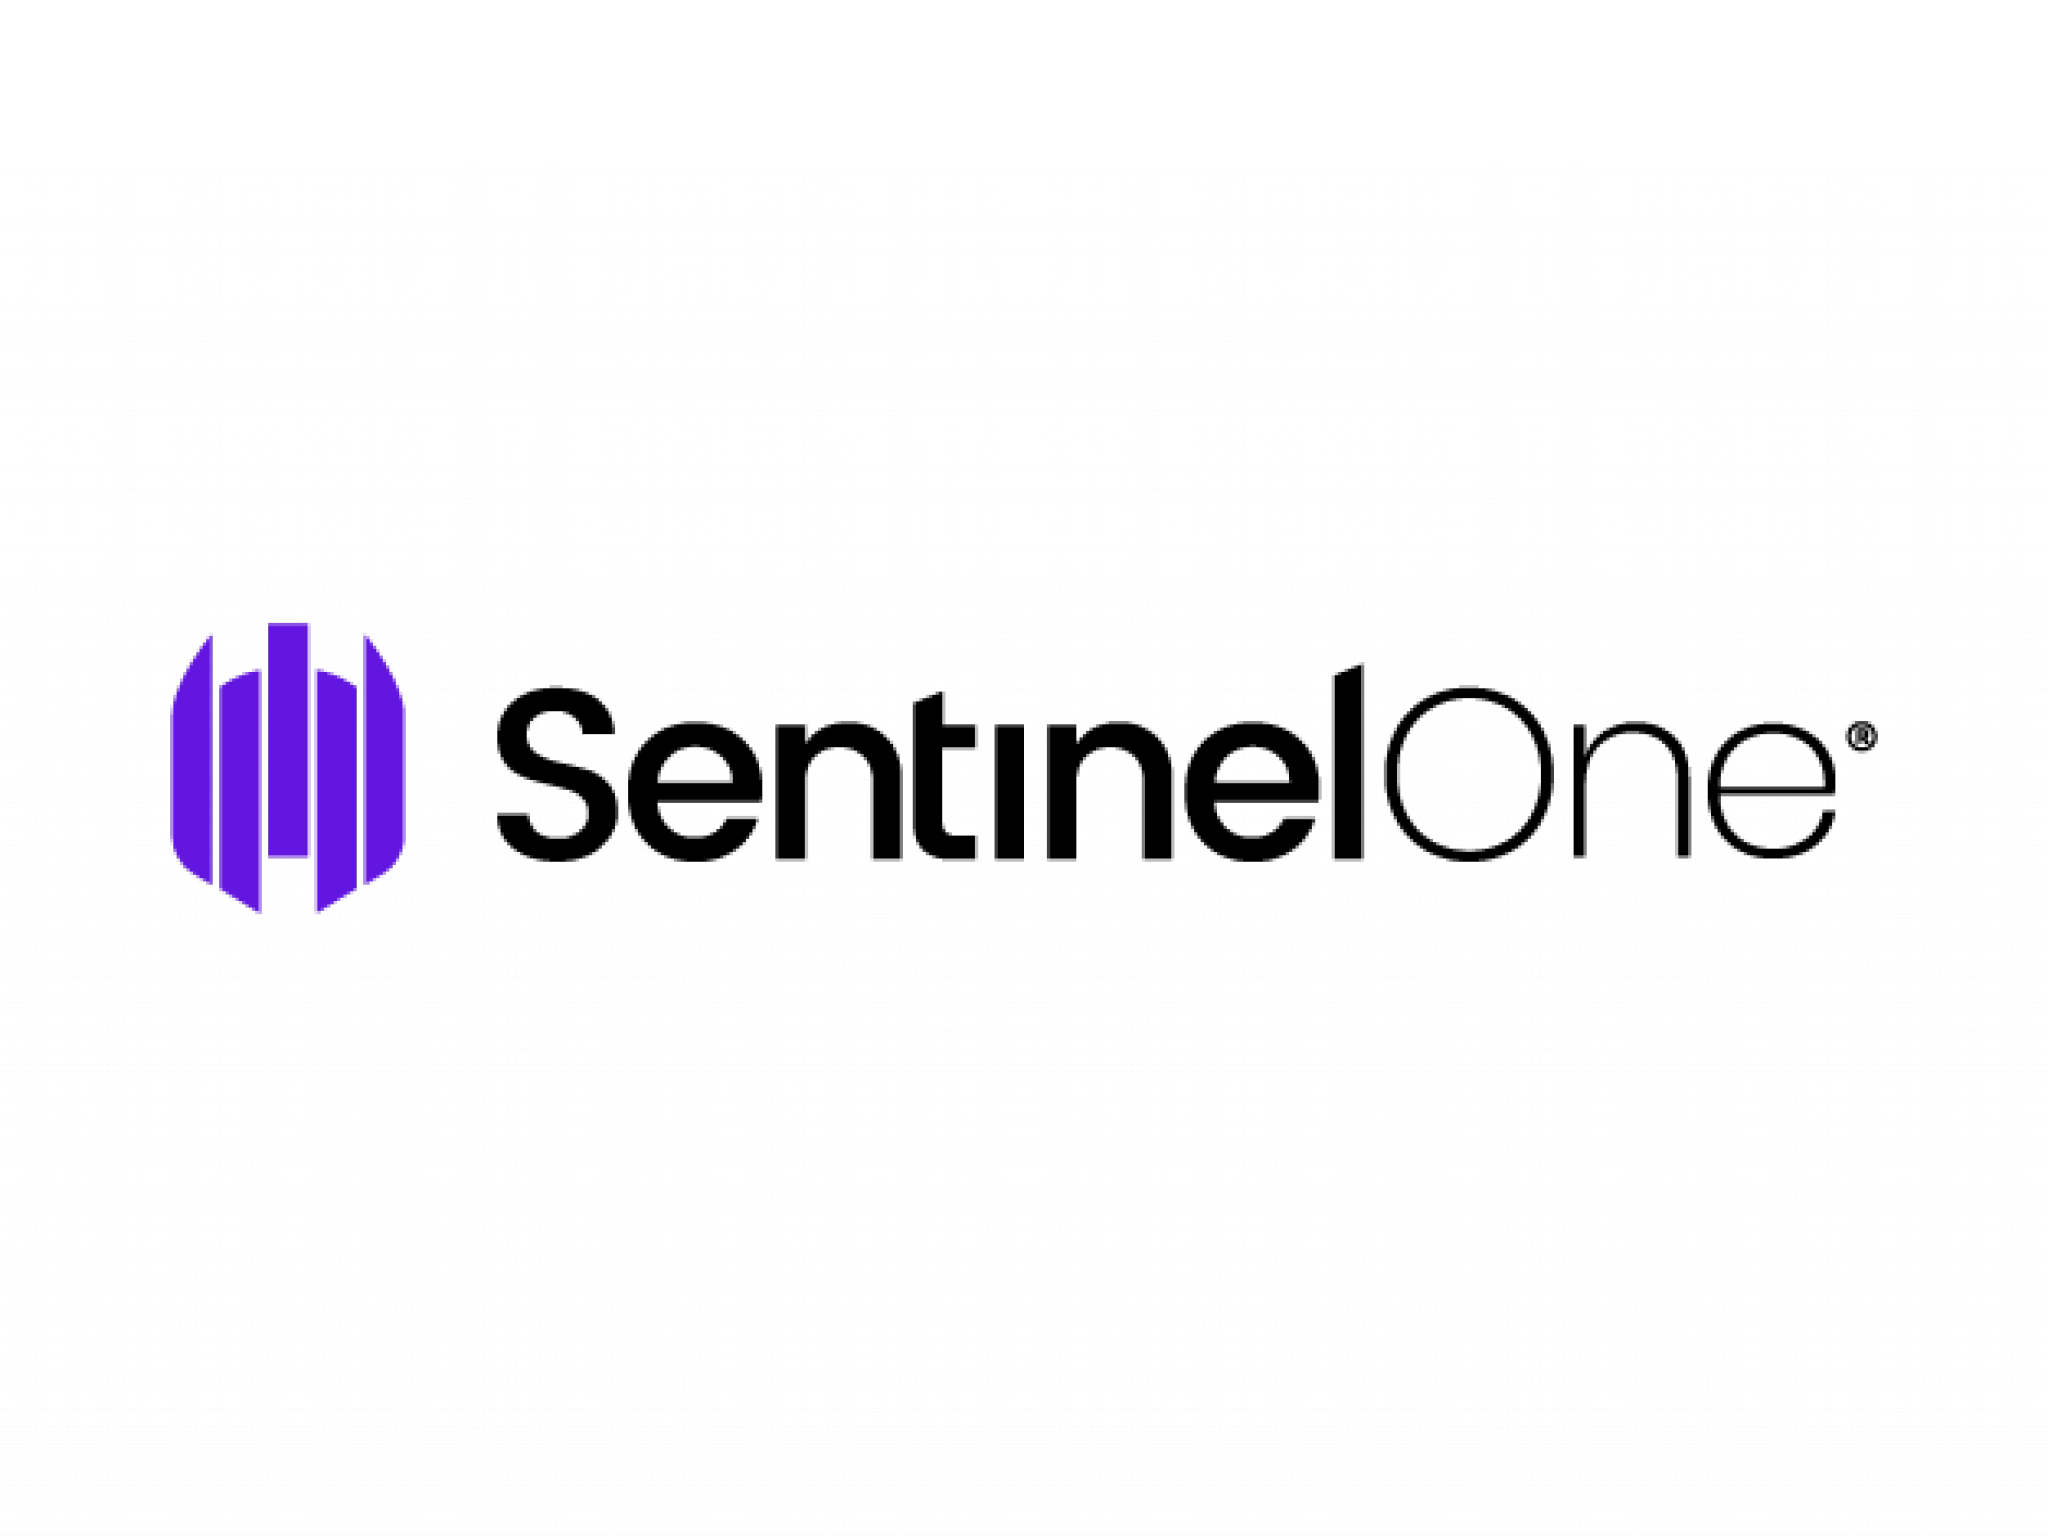 Cybersecurity Stock SentinelOne Has Path To Profitability Over Next Two Years, Analysts Say